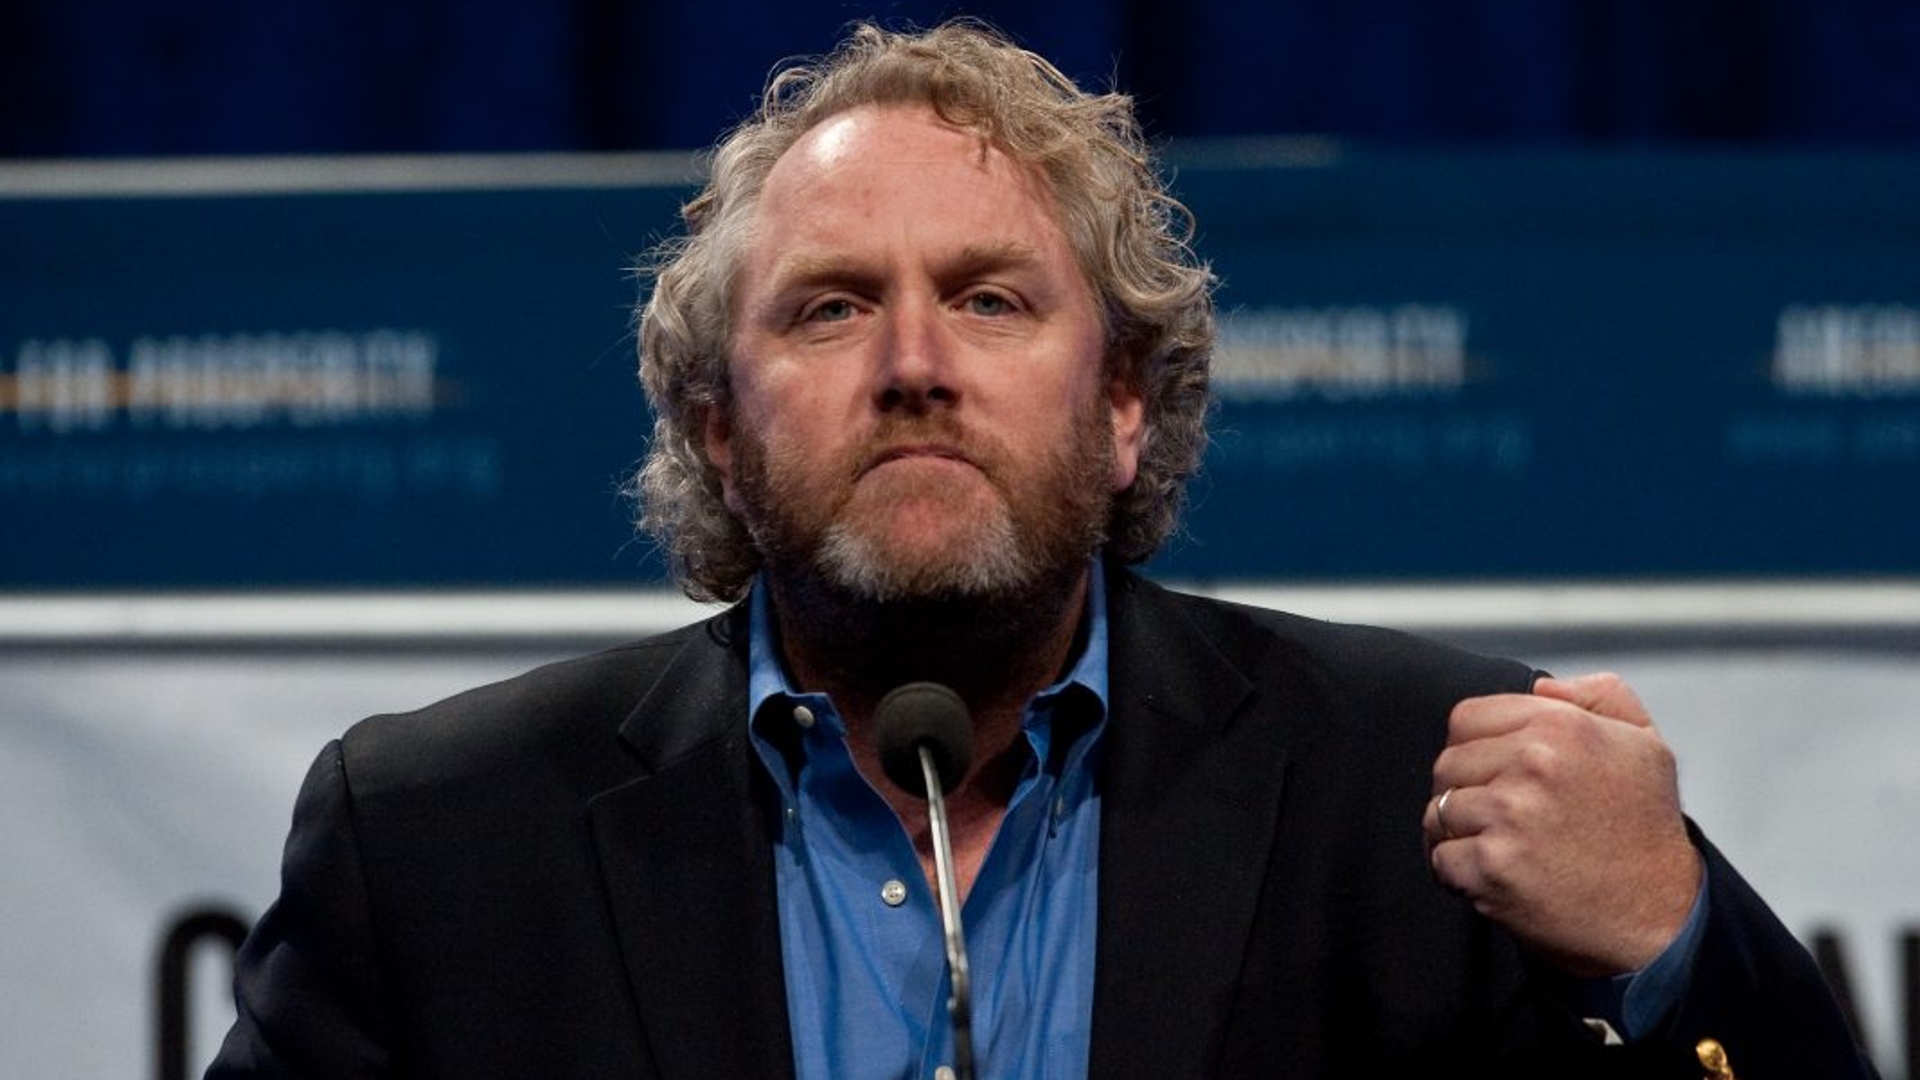 Andrew Breitbart, editor and founder of